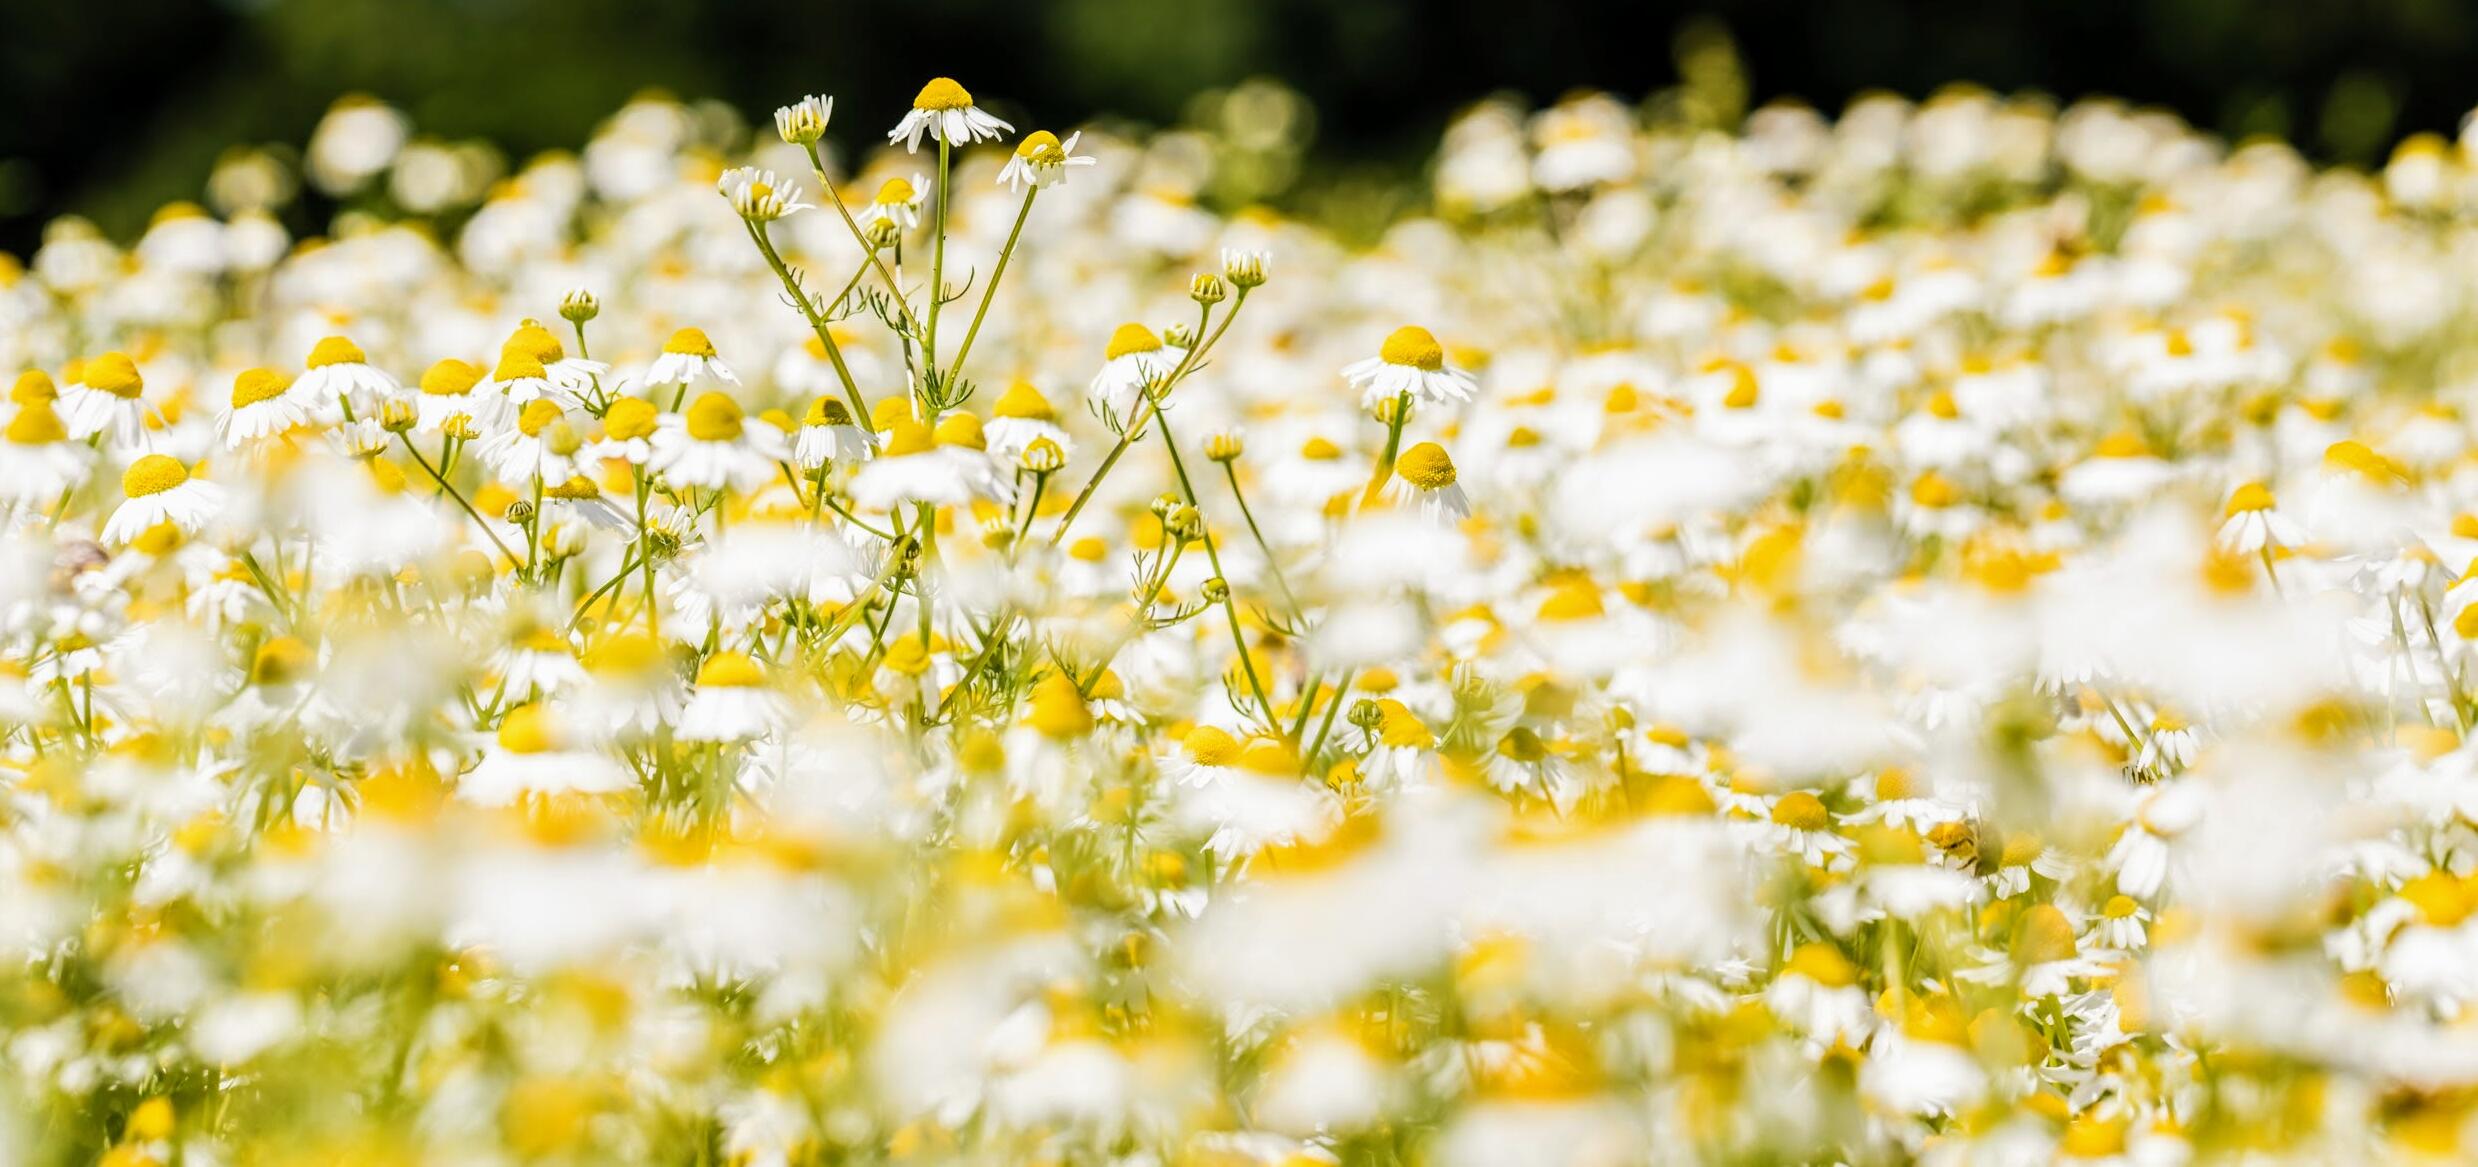 kl_chamomile_active-ingredient_field_plant_2019 -72- 1920x300